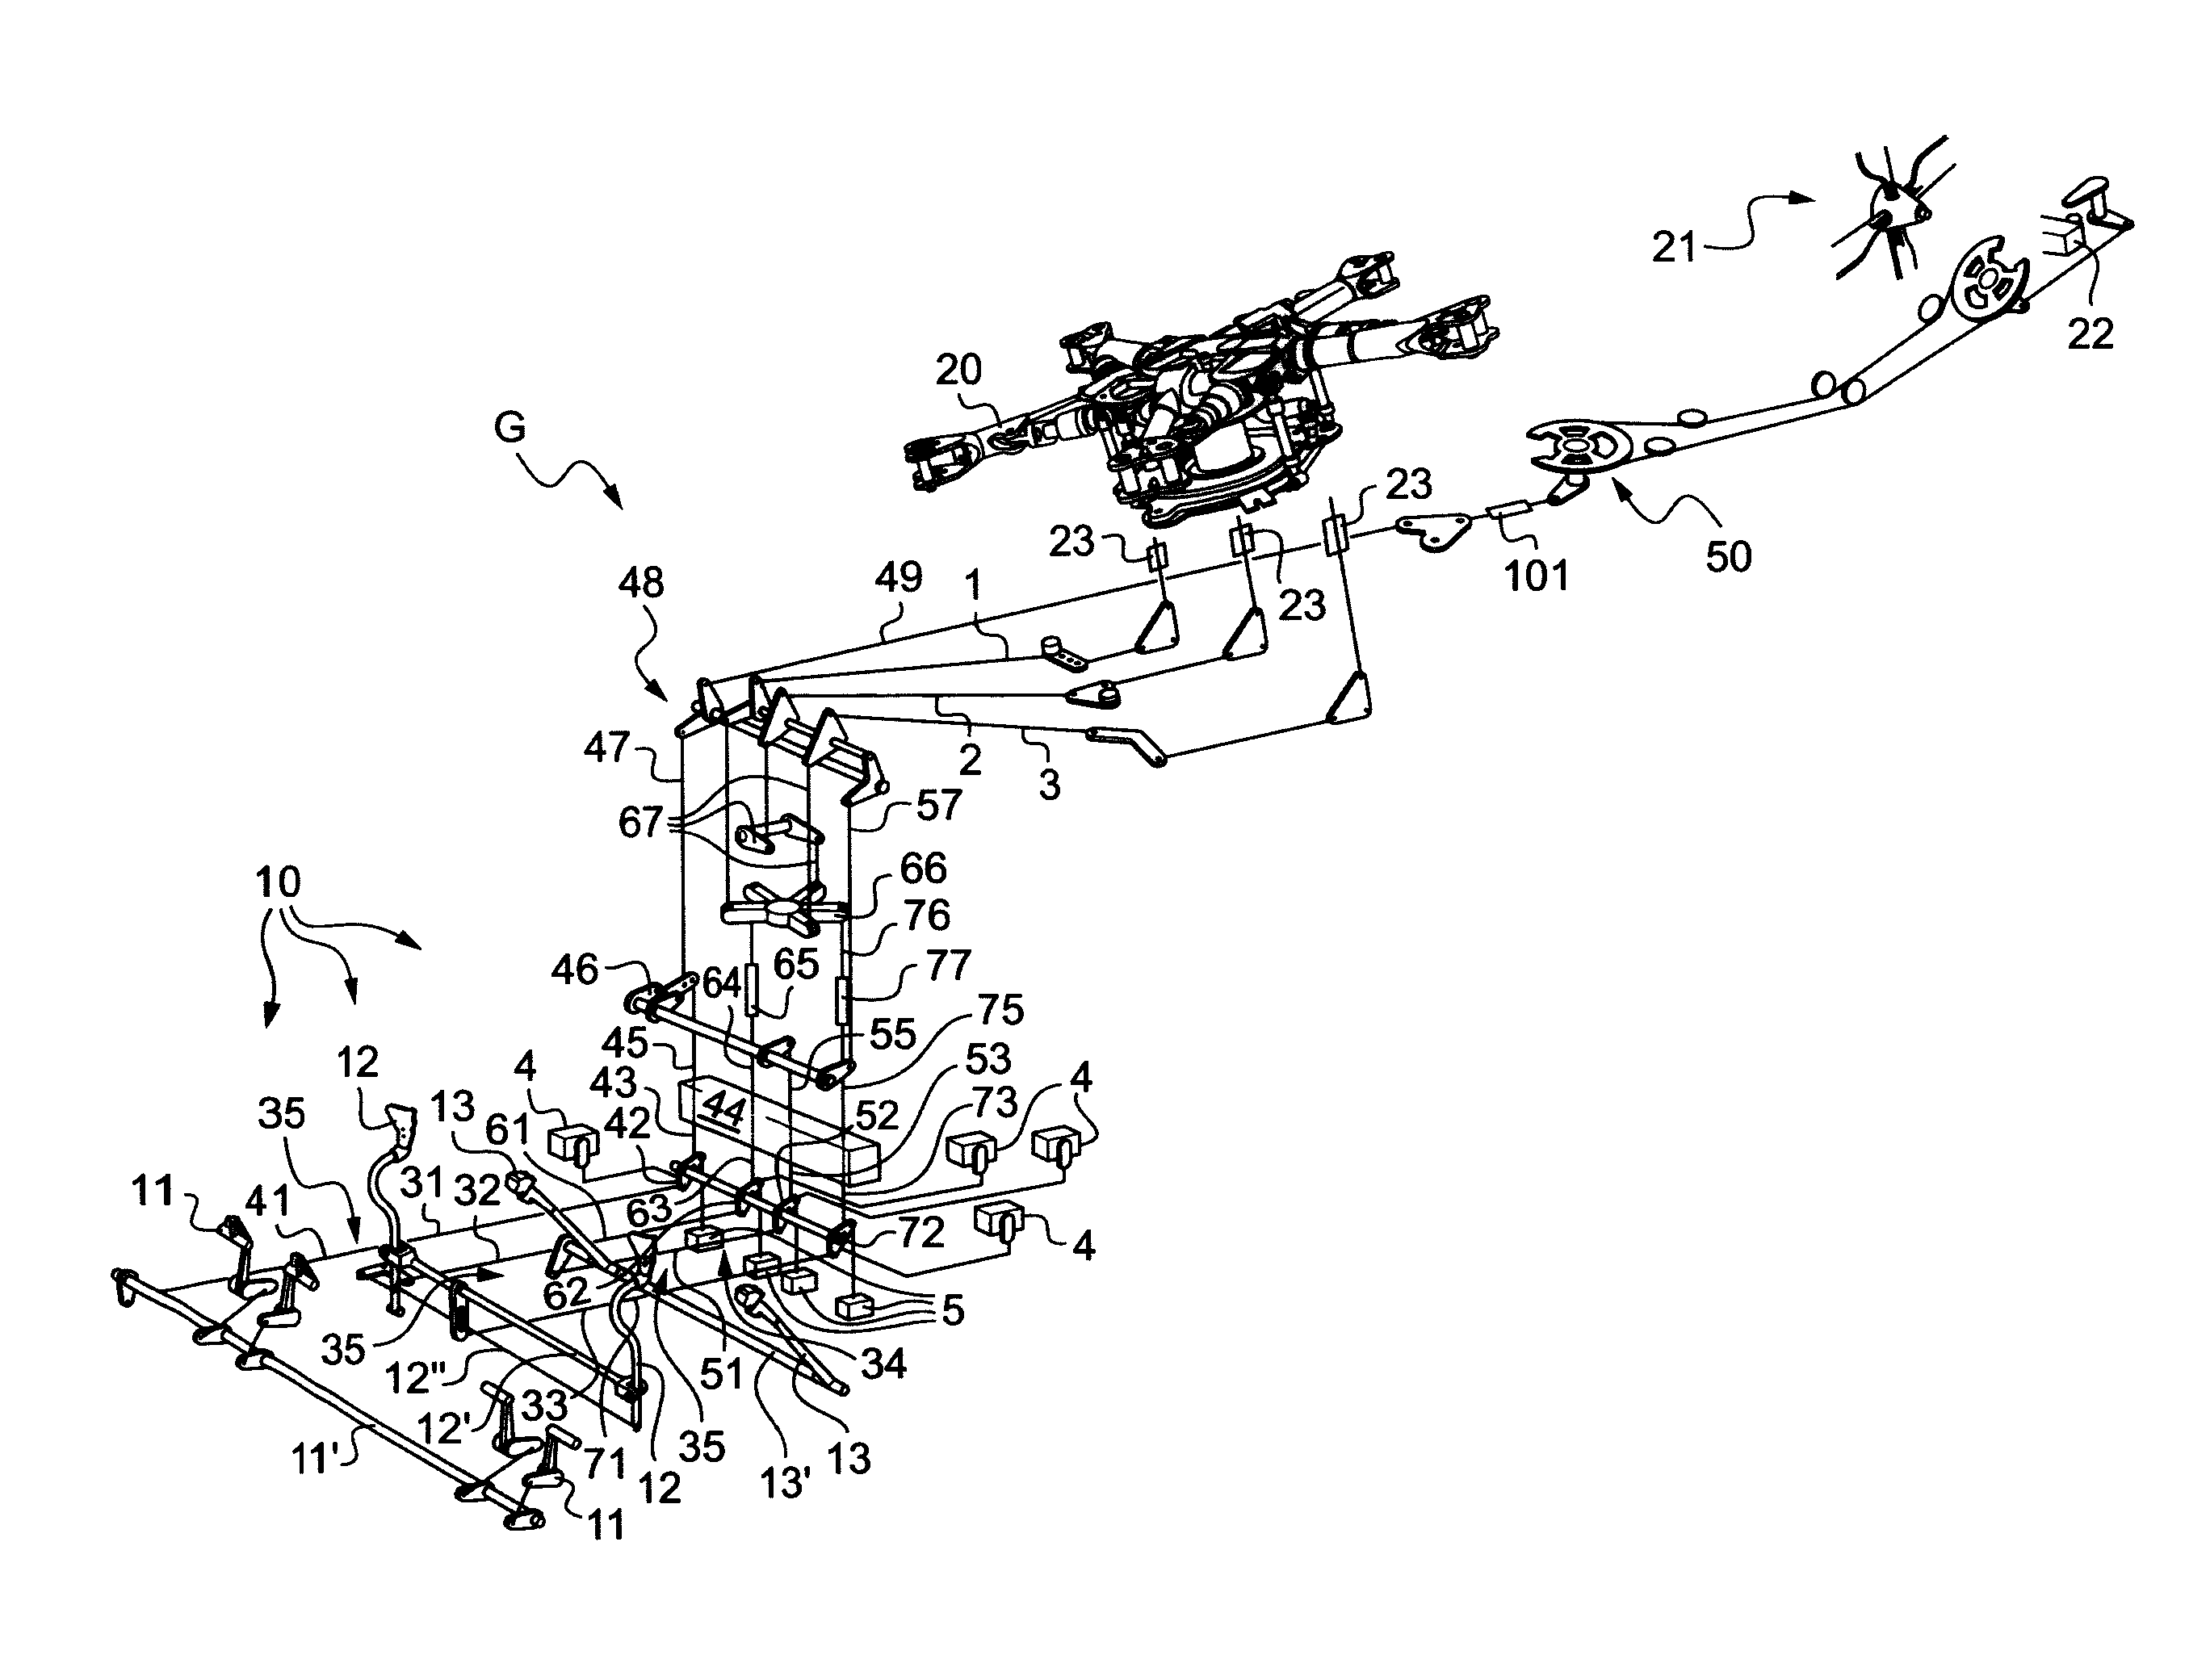 Method of assisting piloting, piloting assistance means, and a piloting assistance device for a rotorcraft using said piloting assistance means to implement said piloting assistance method